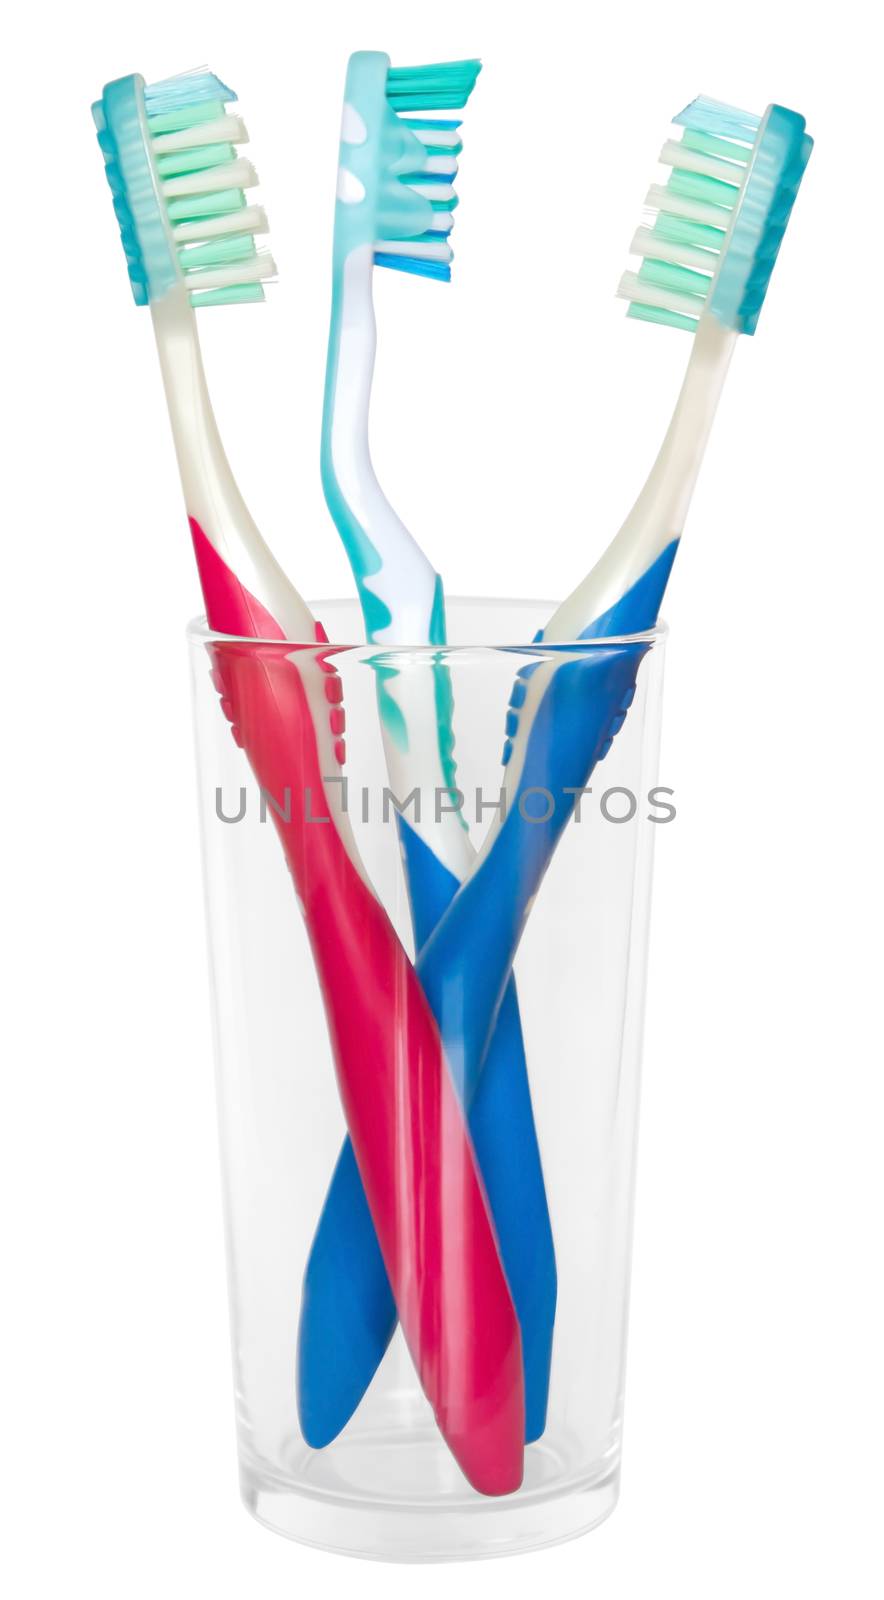 Tooth-brushes in glass by Venakr